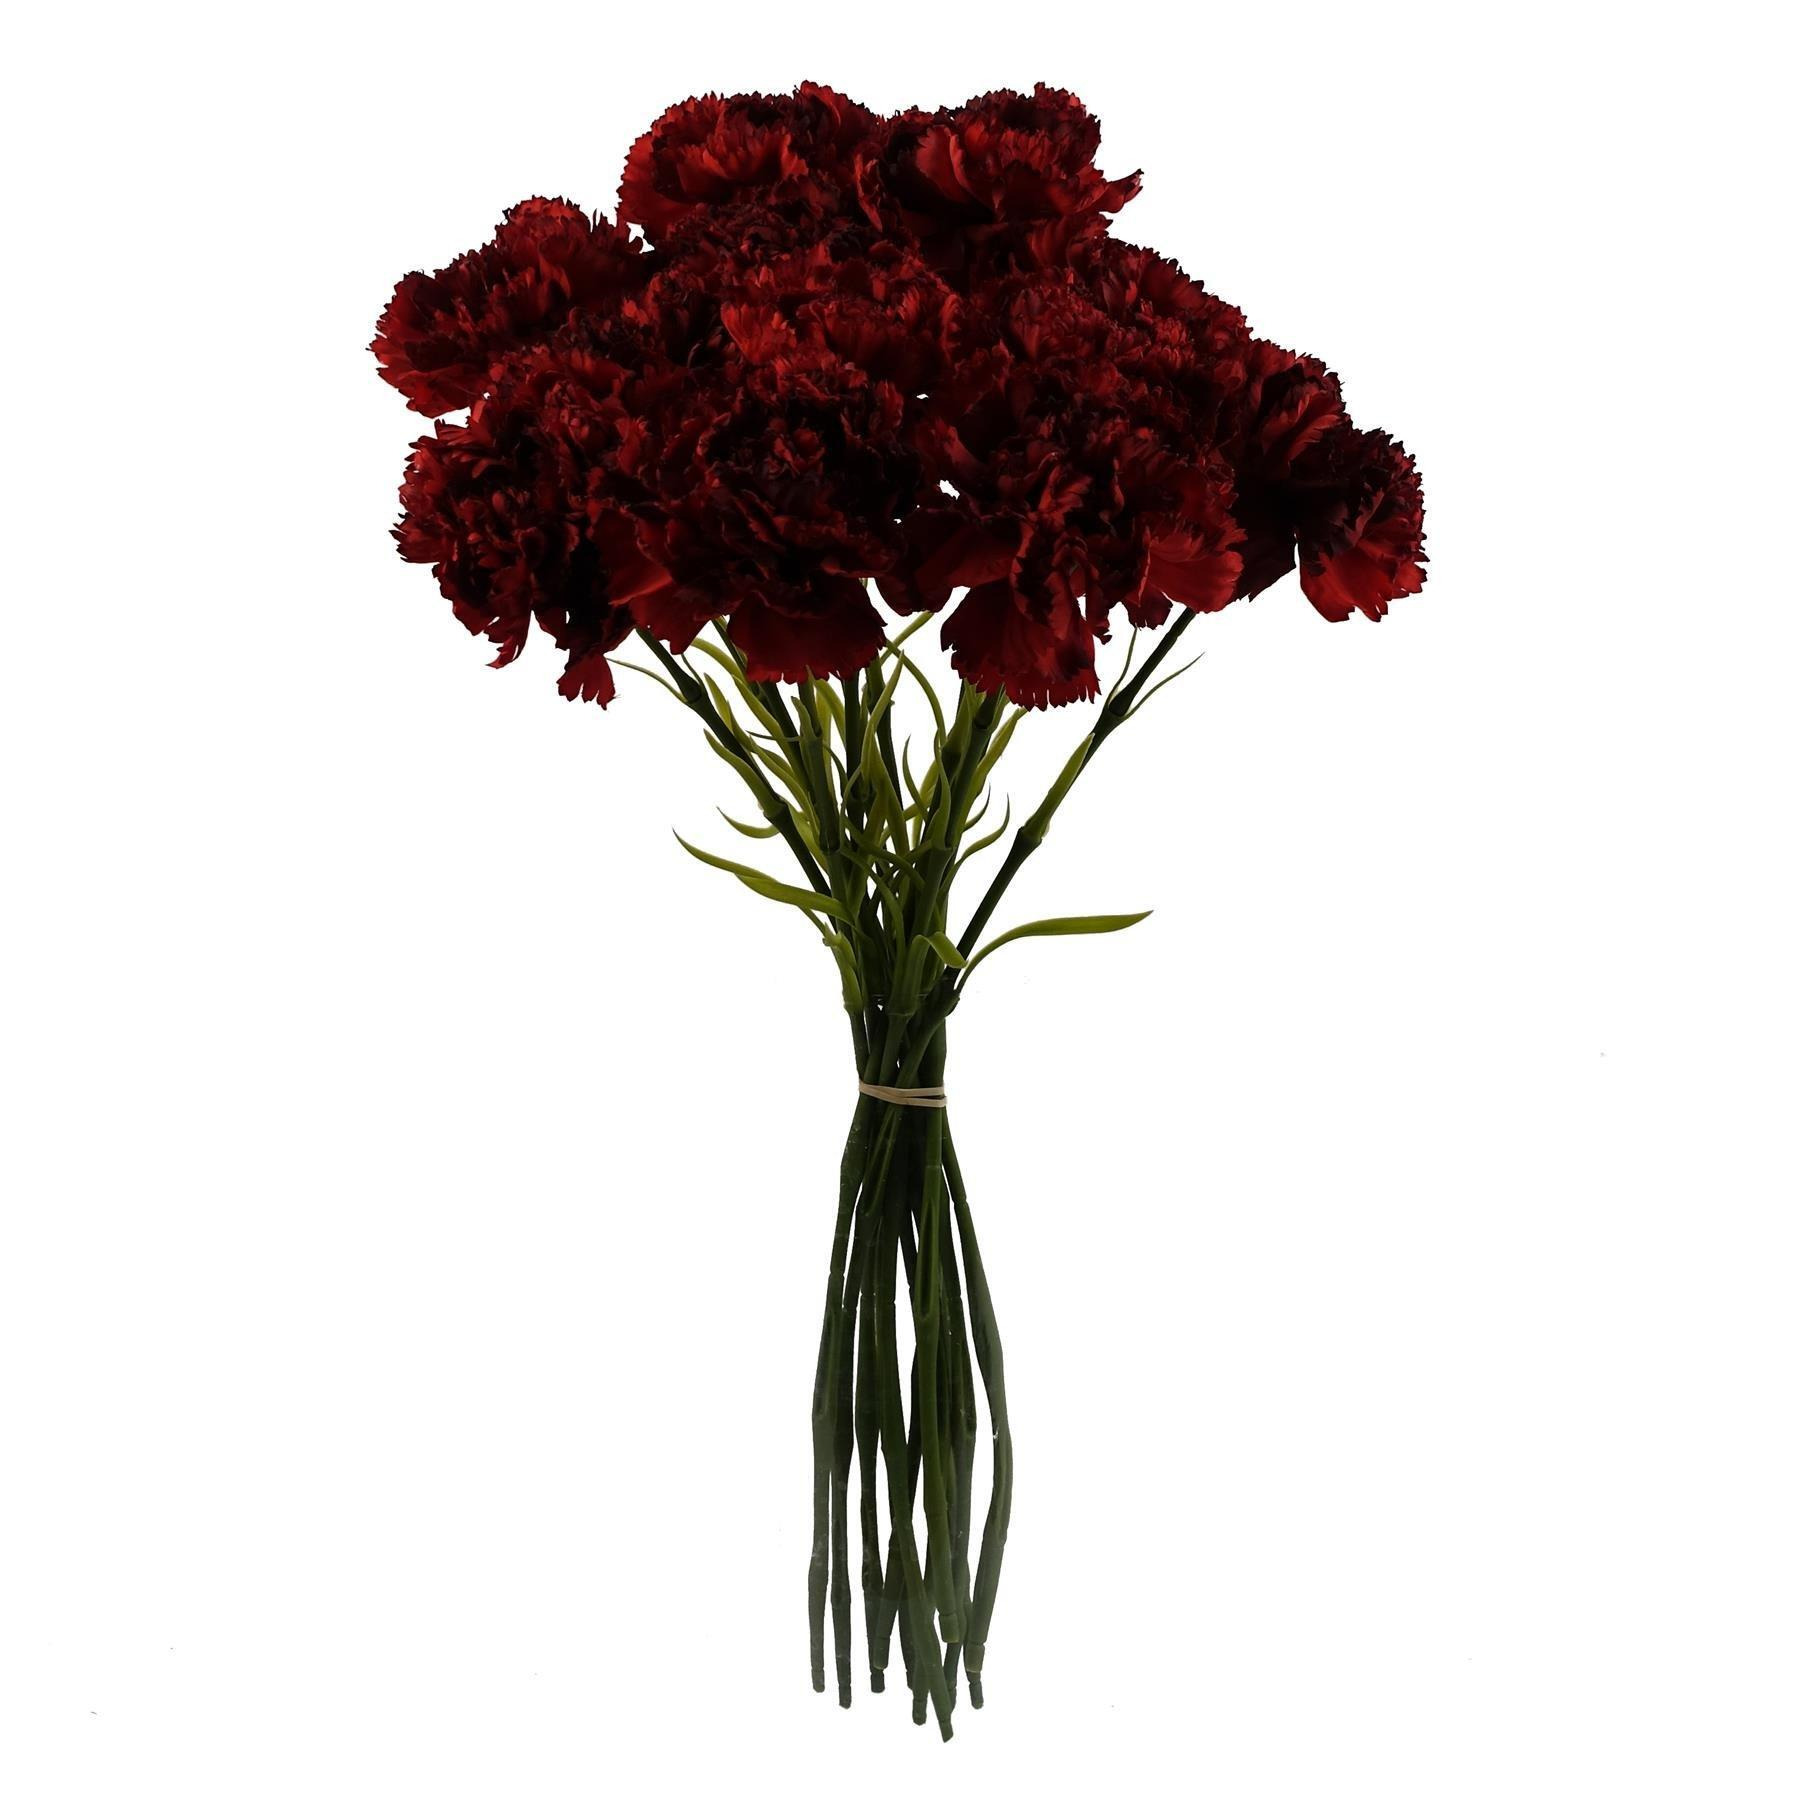 12 x Red Carnation Artificial Flower - image 1